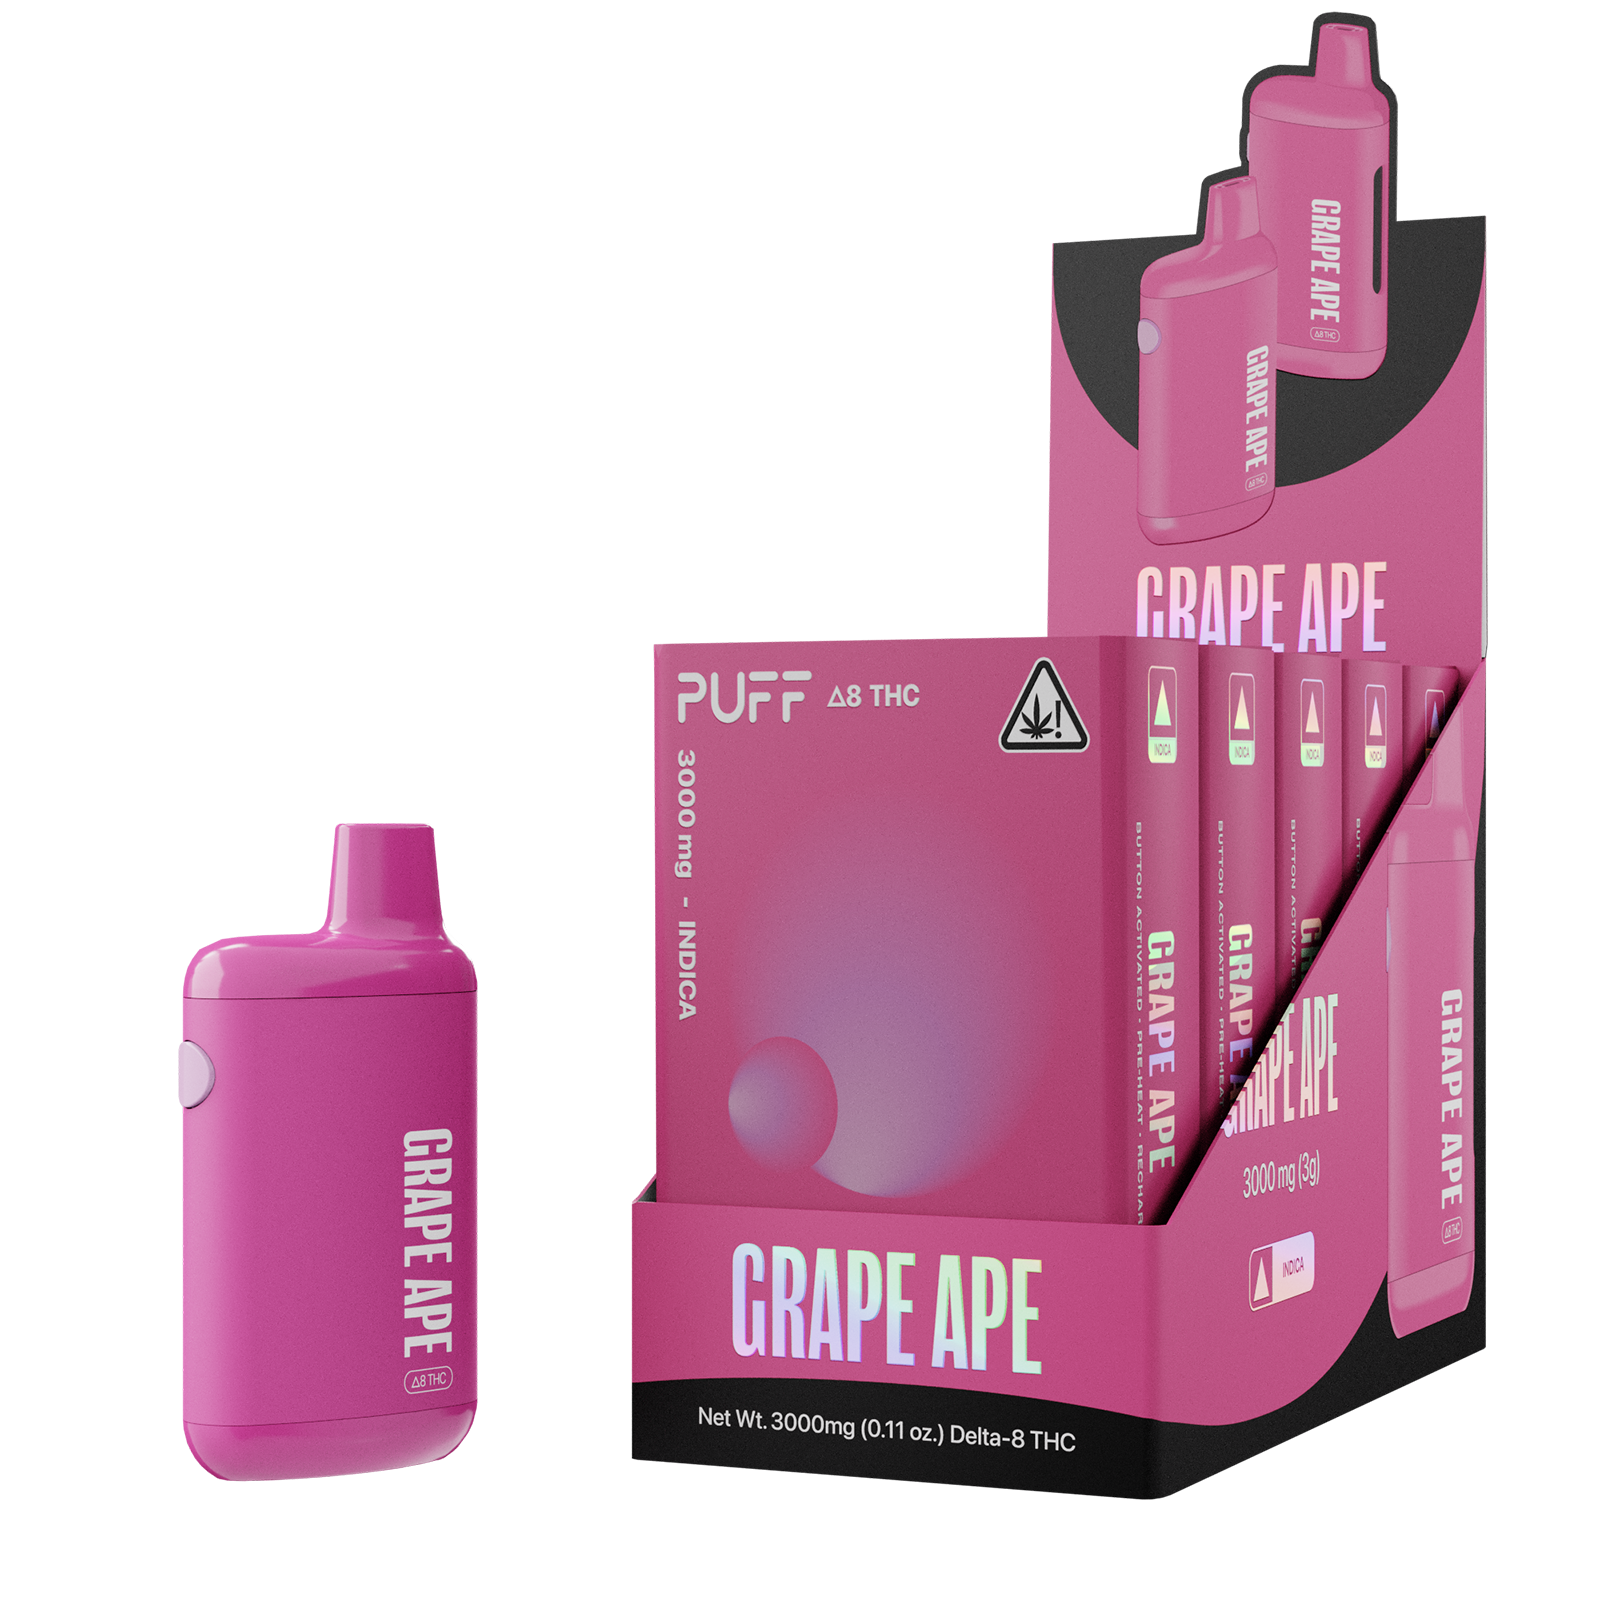 Puff Bar Delta 8 THC Grape Ape Disposable Device with Store Packaging